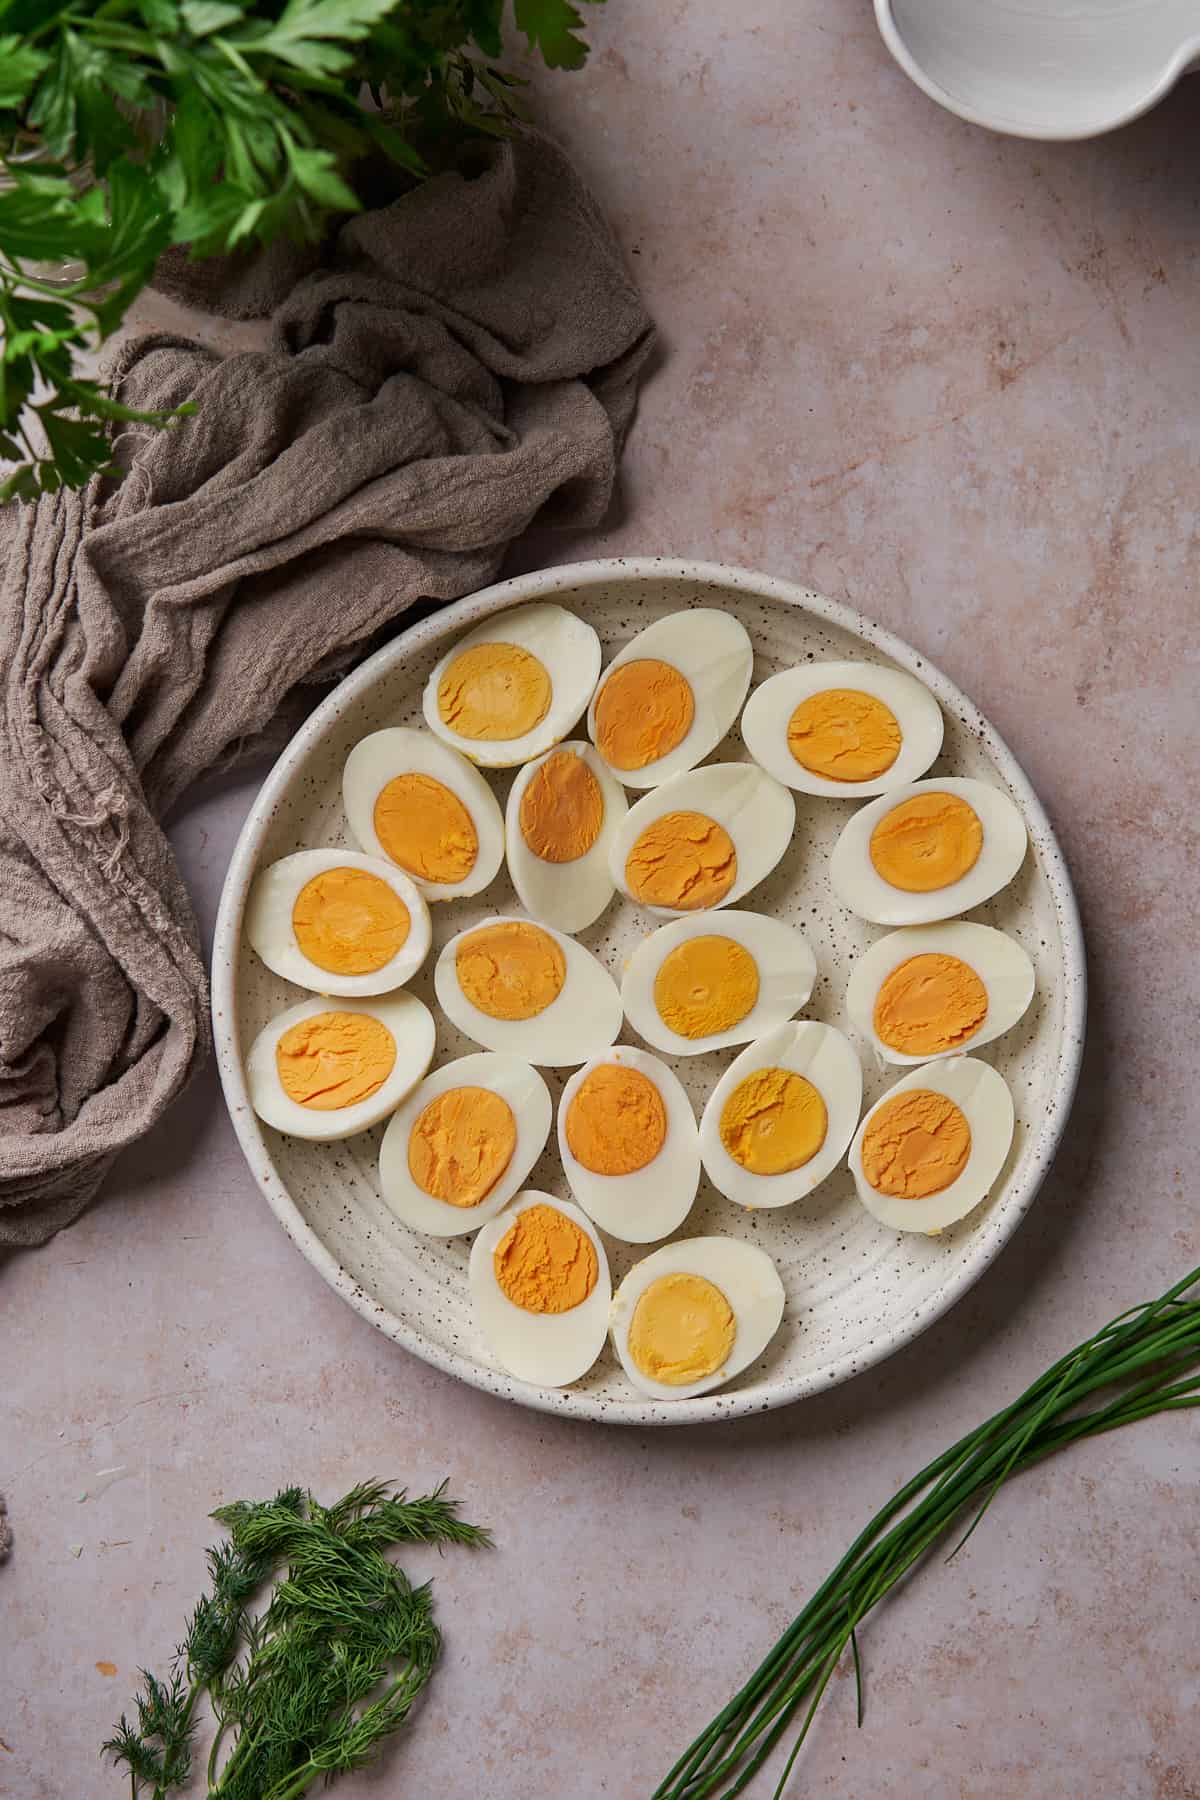 hard boiled eggs cut in half lengthwise with the yolks in tact on a plate. 